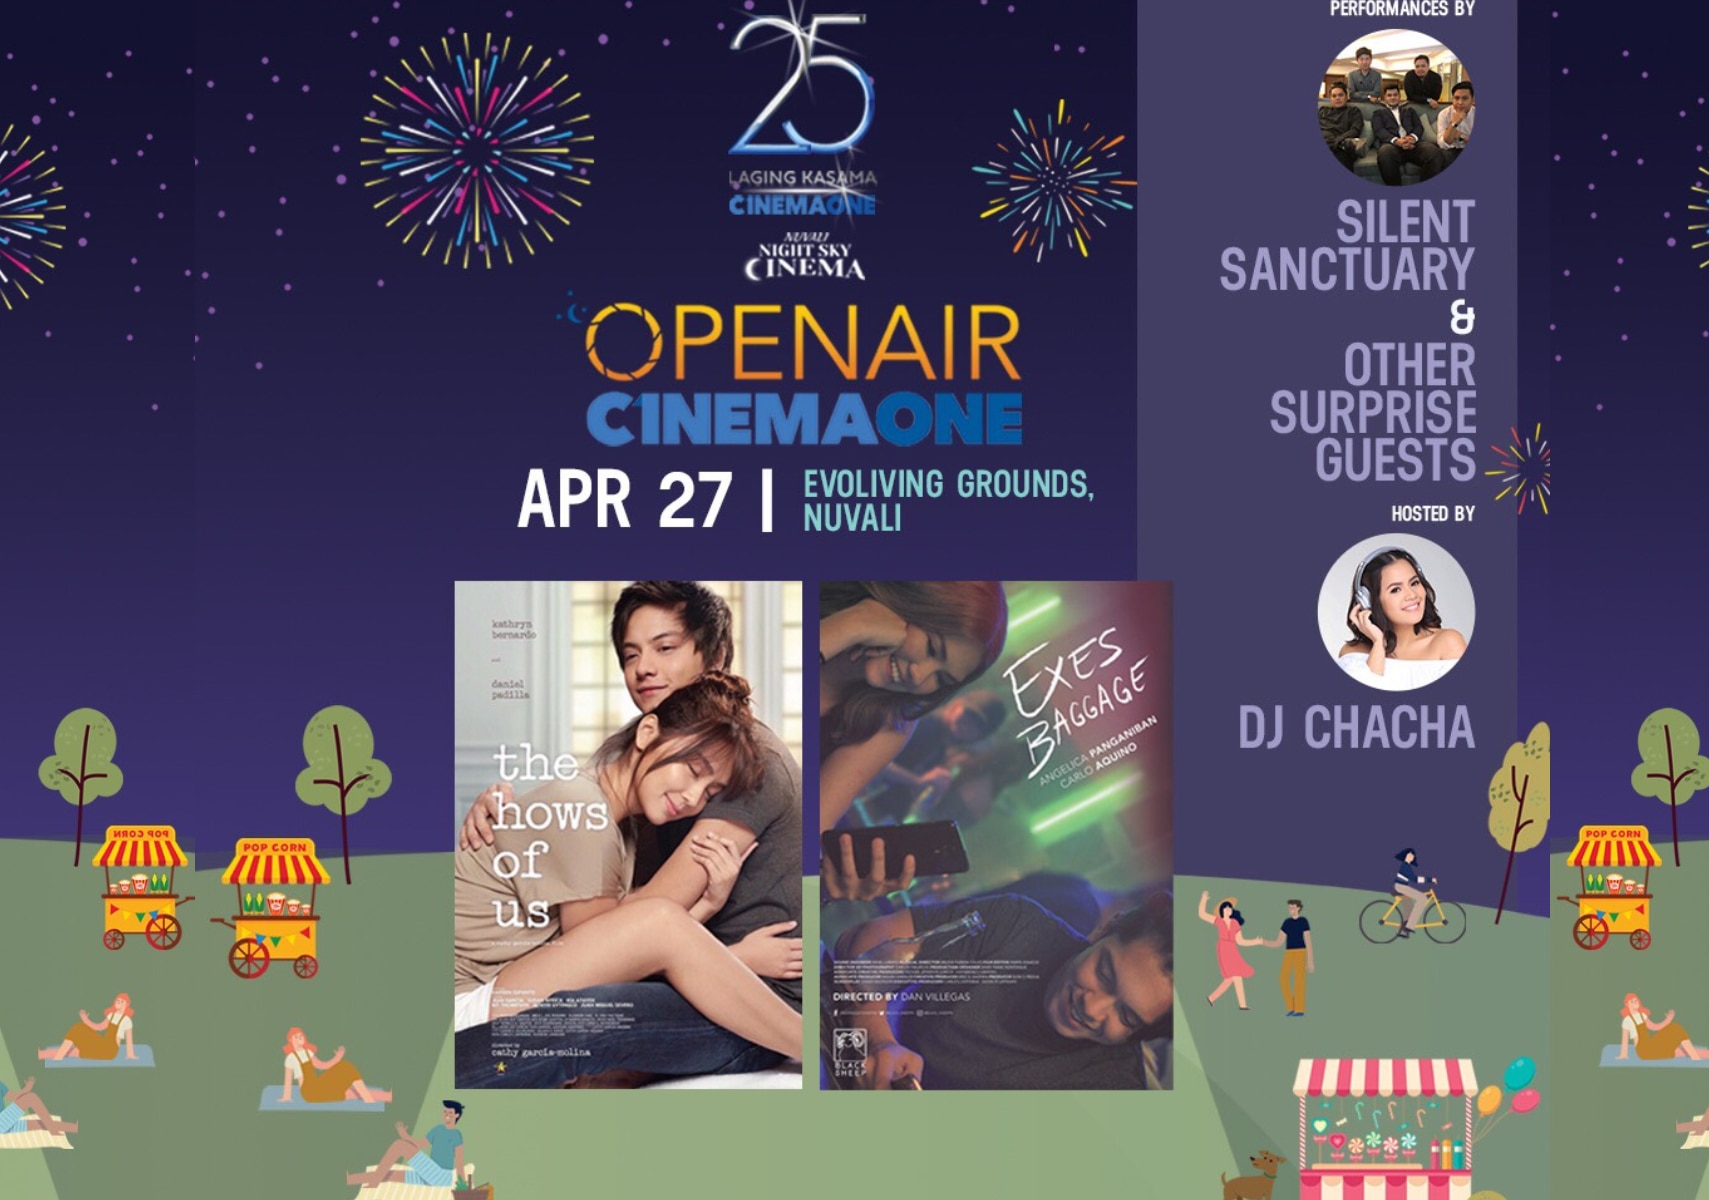 OpenAir Cinema One brings “Exes Baggage” and “The Hows of Us” to Nuvali